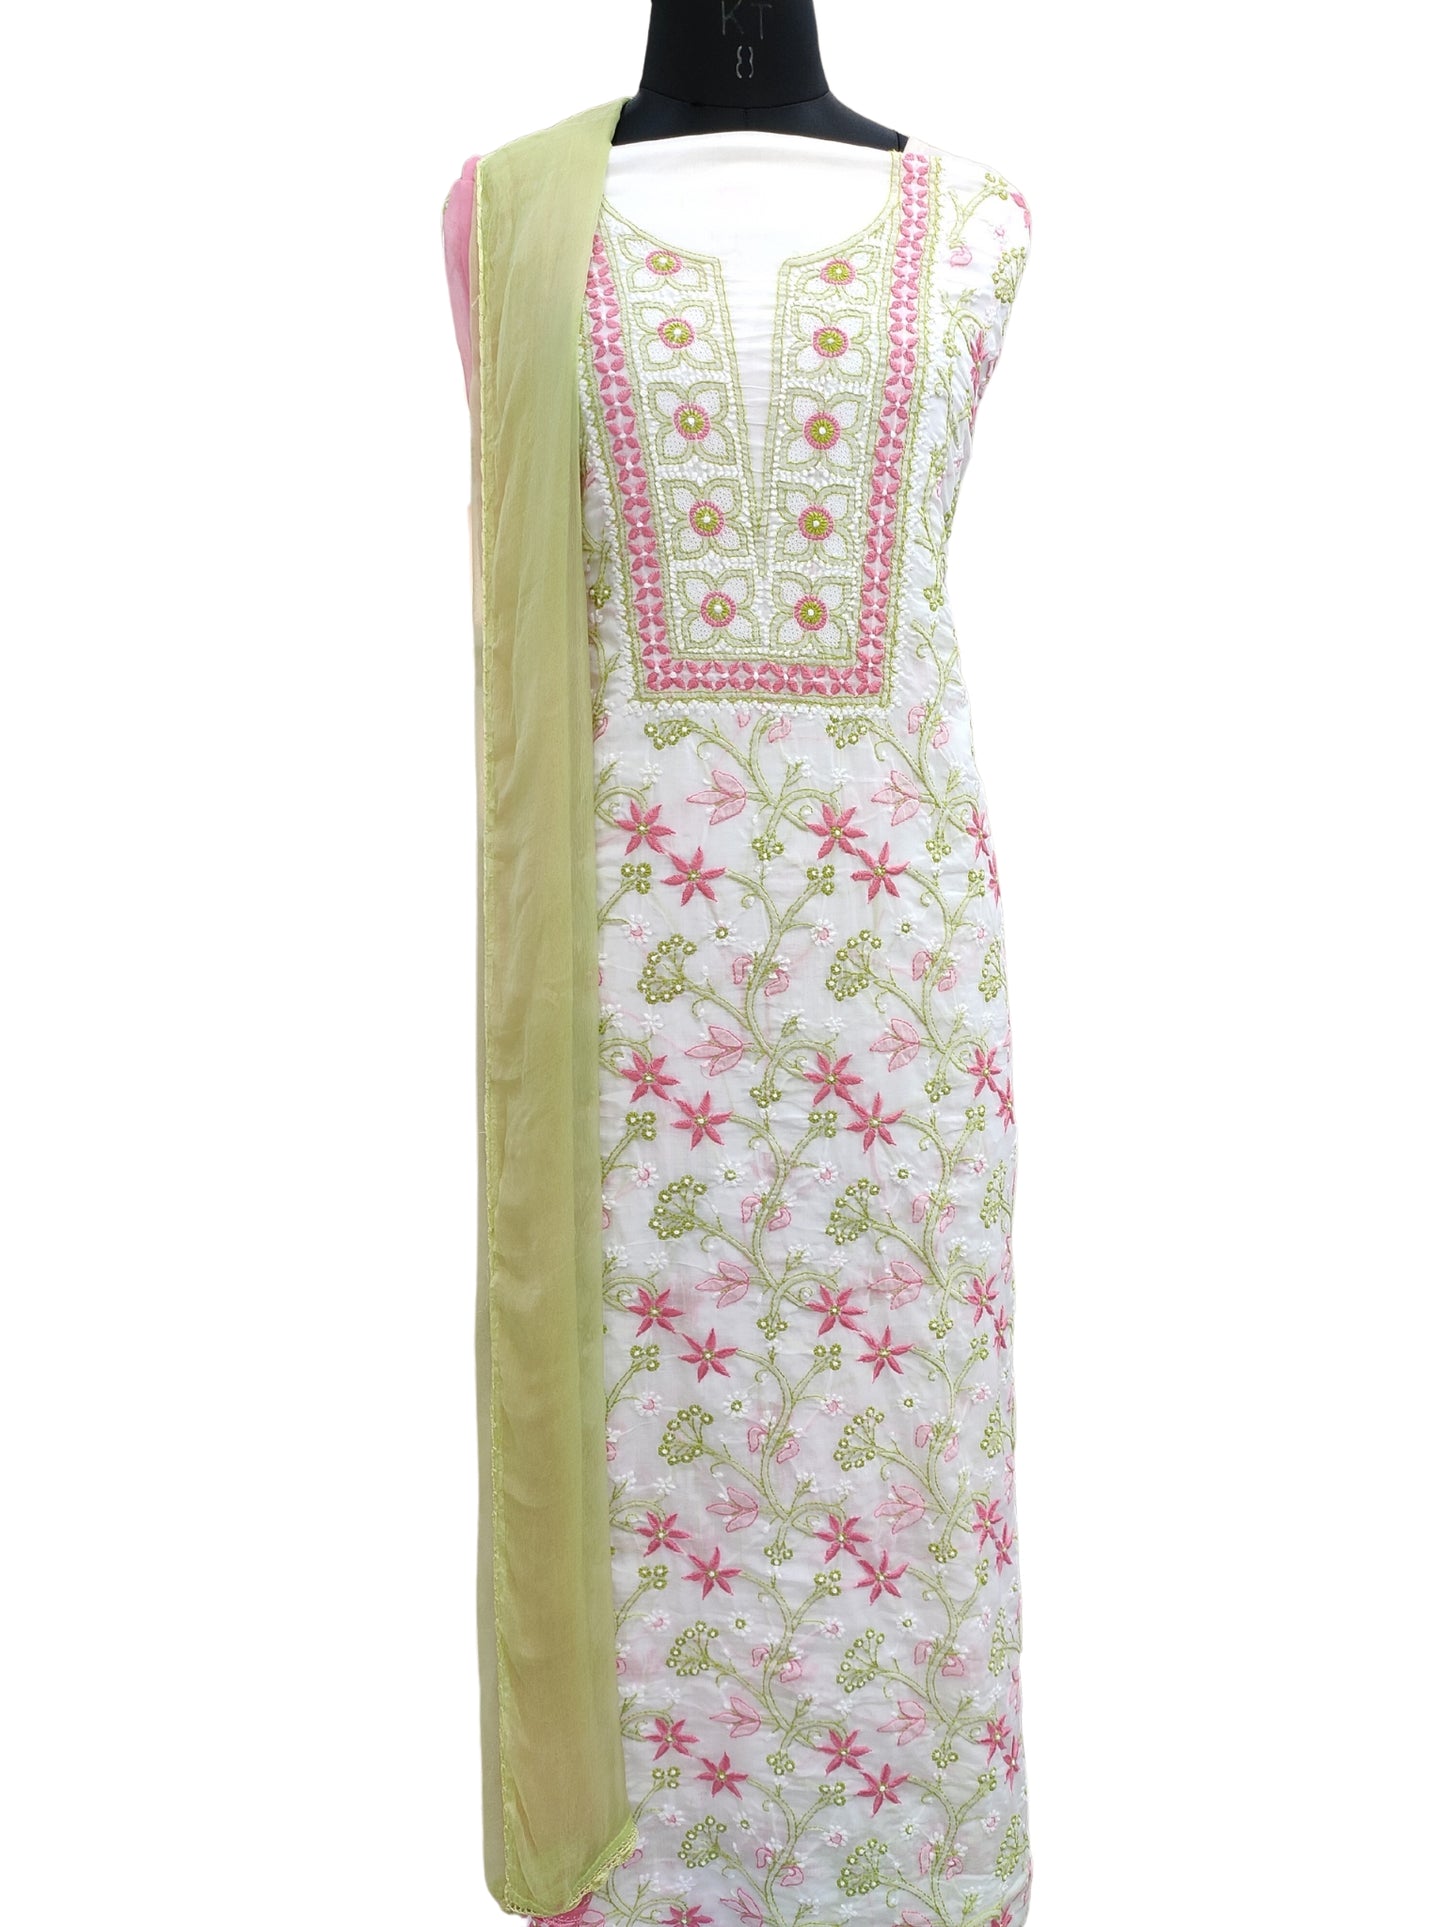 Shyamal Chikan Hand Embroidered White Pure Cotton Lucknowi Chikankari Unstitched Suit Piece - S20694